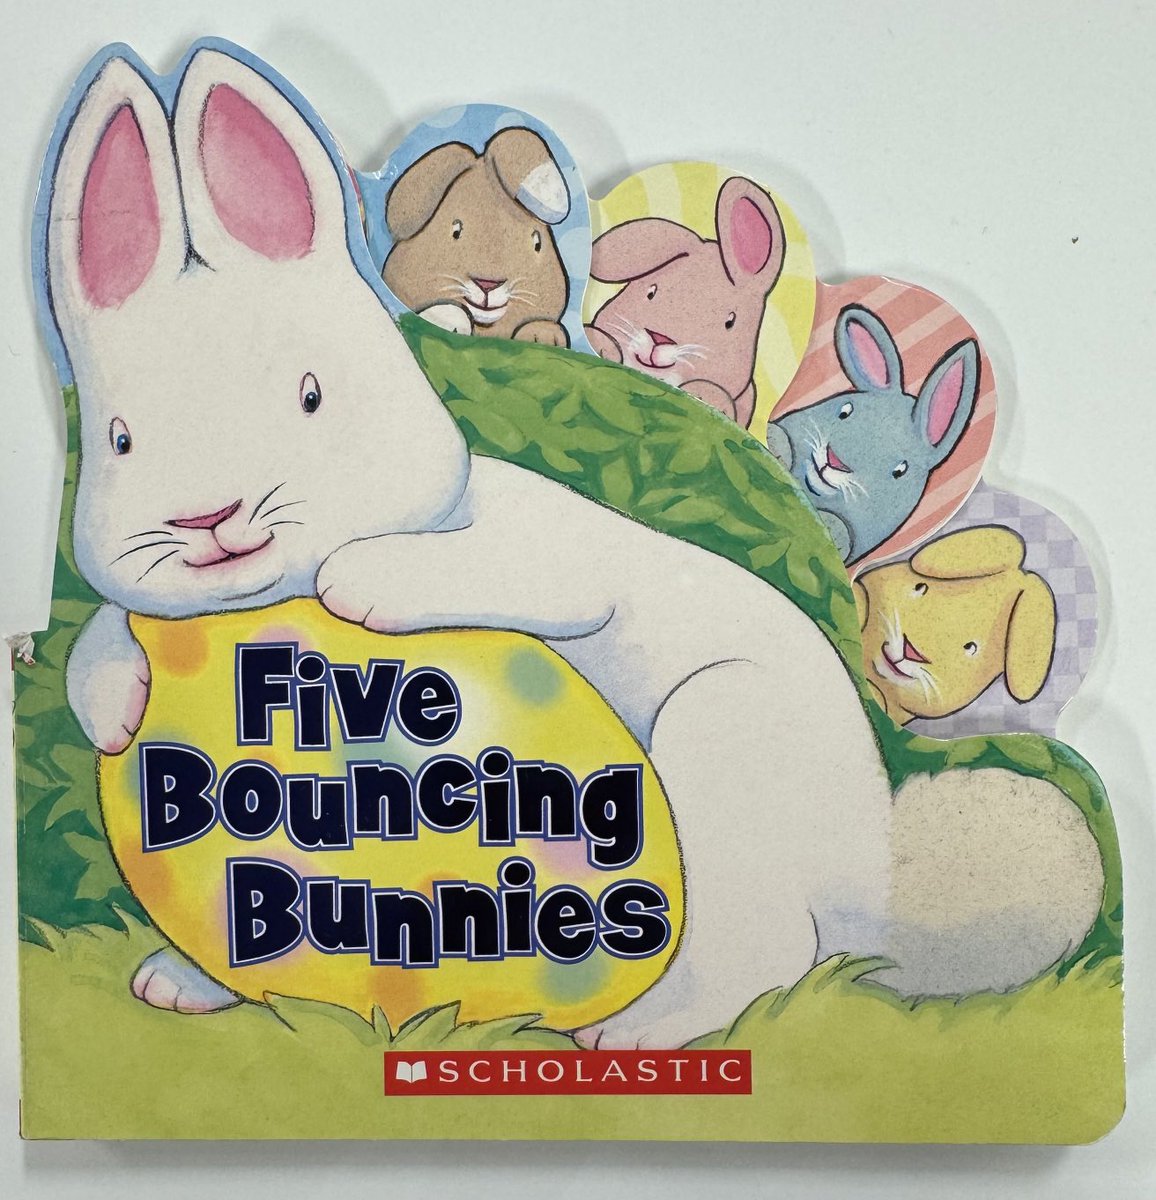 Explore one fewer or -1 with Five Bouncing Bunnies.